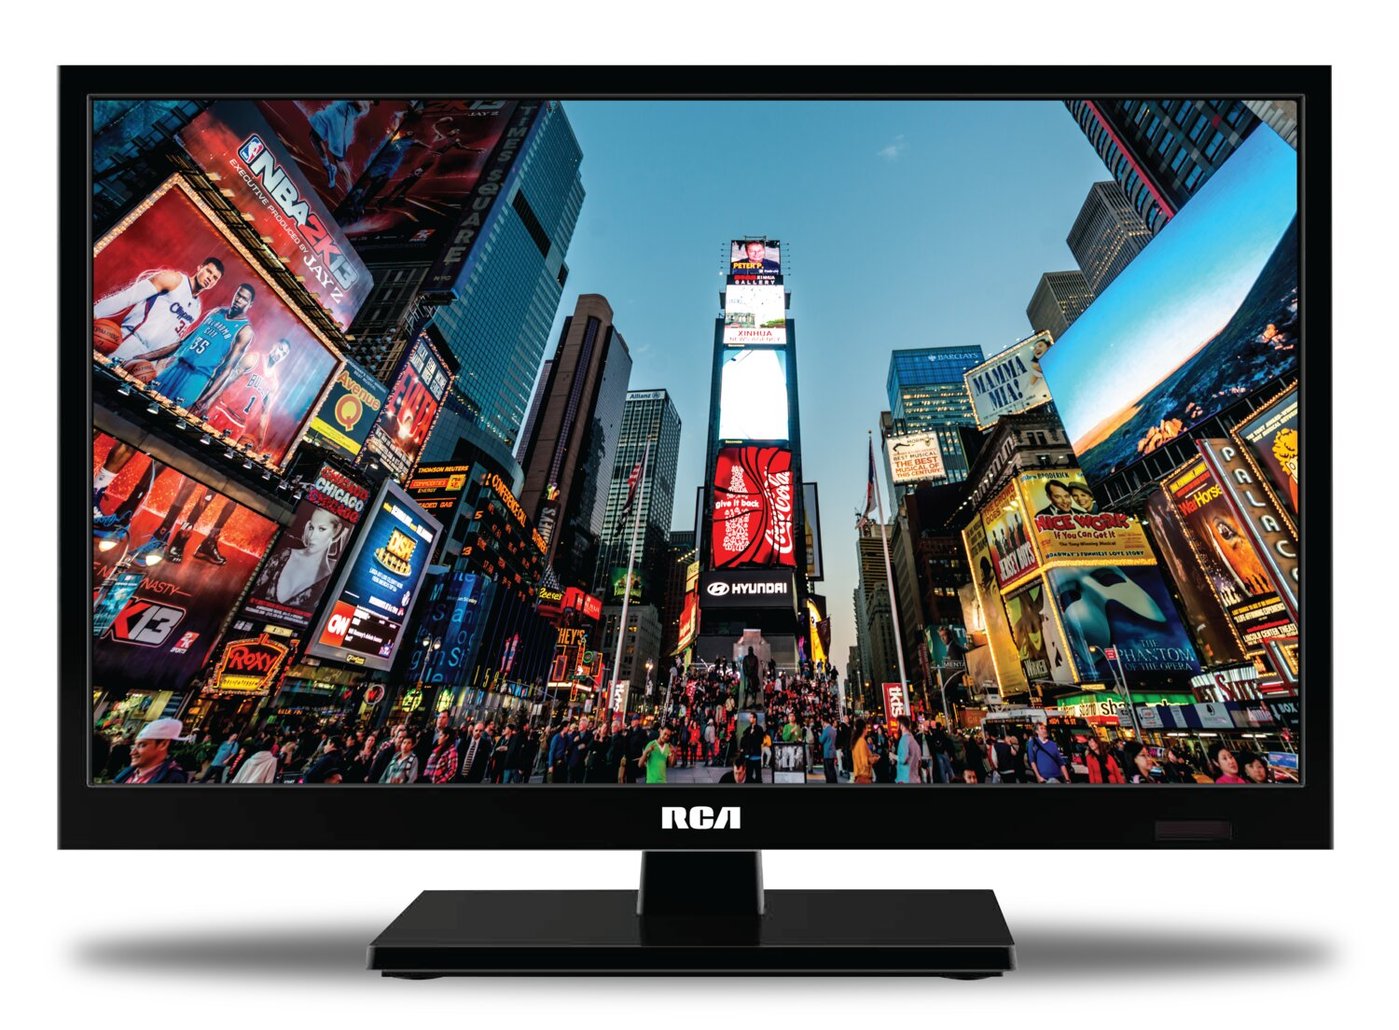 Sumber: https://www.thebrick.com/products/rca-24-720p-hd-home-travel-television-with-car-cord-rt2471-ac